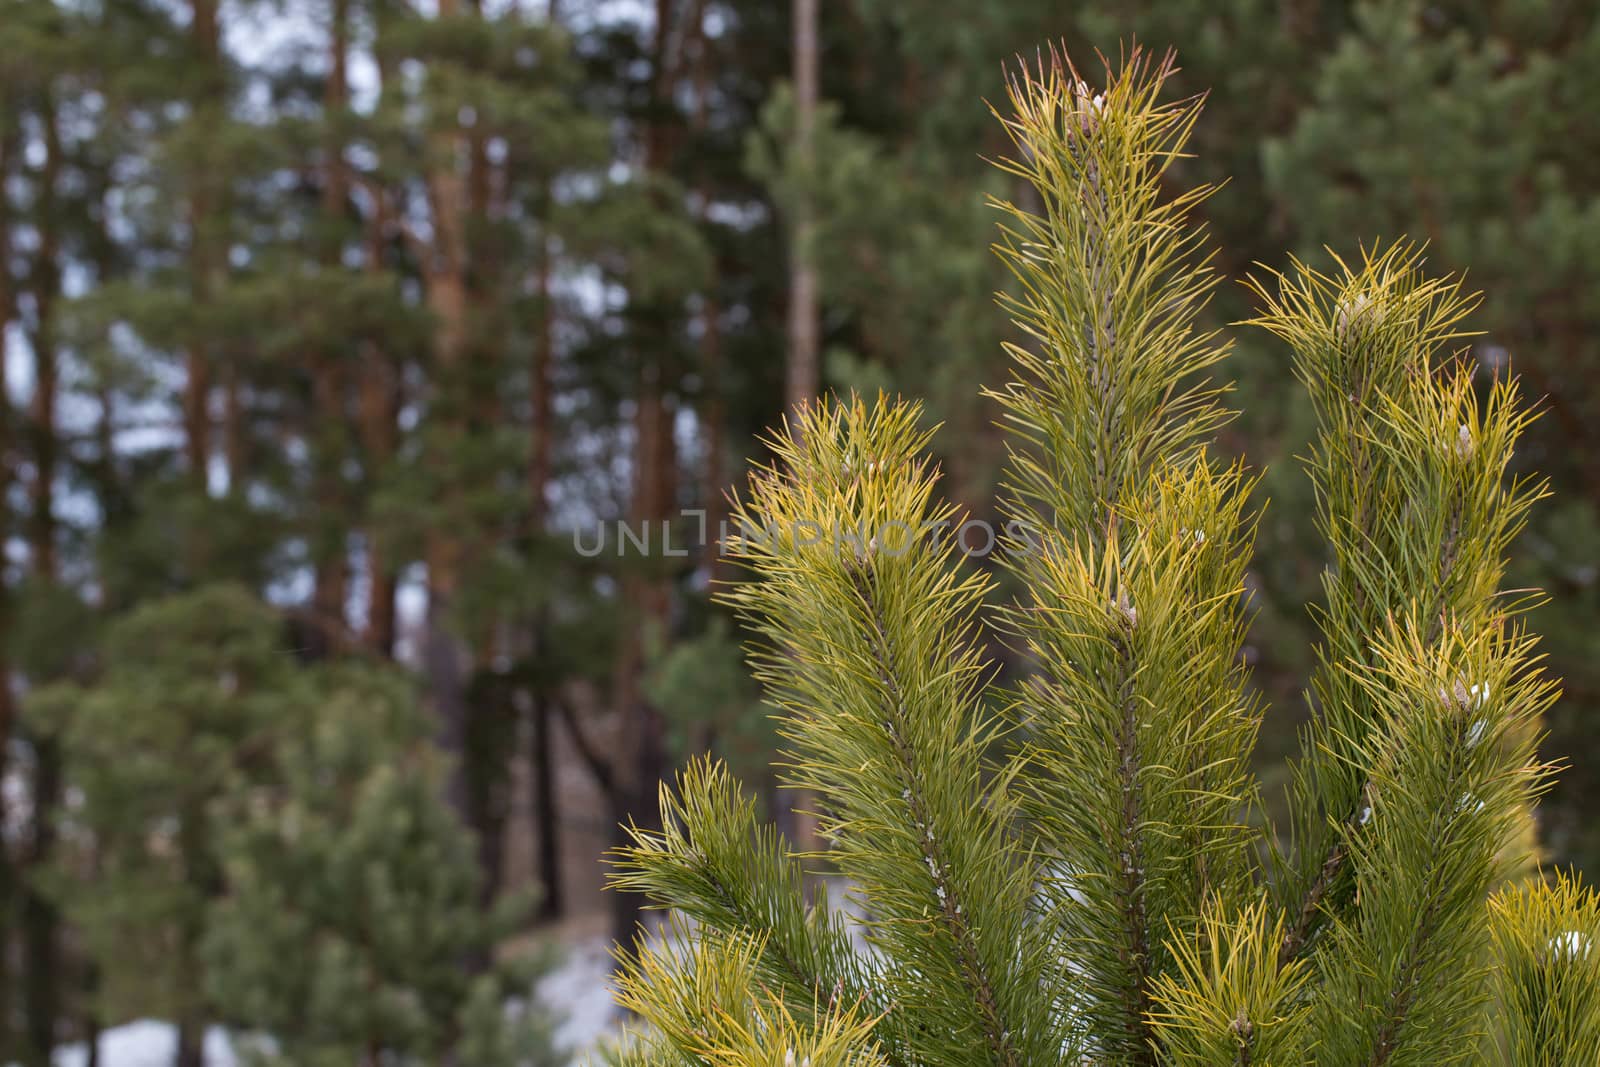 The top of a pine tree. by sergey_filonenko